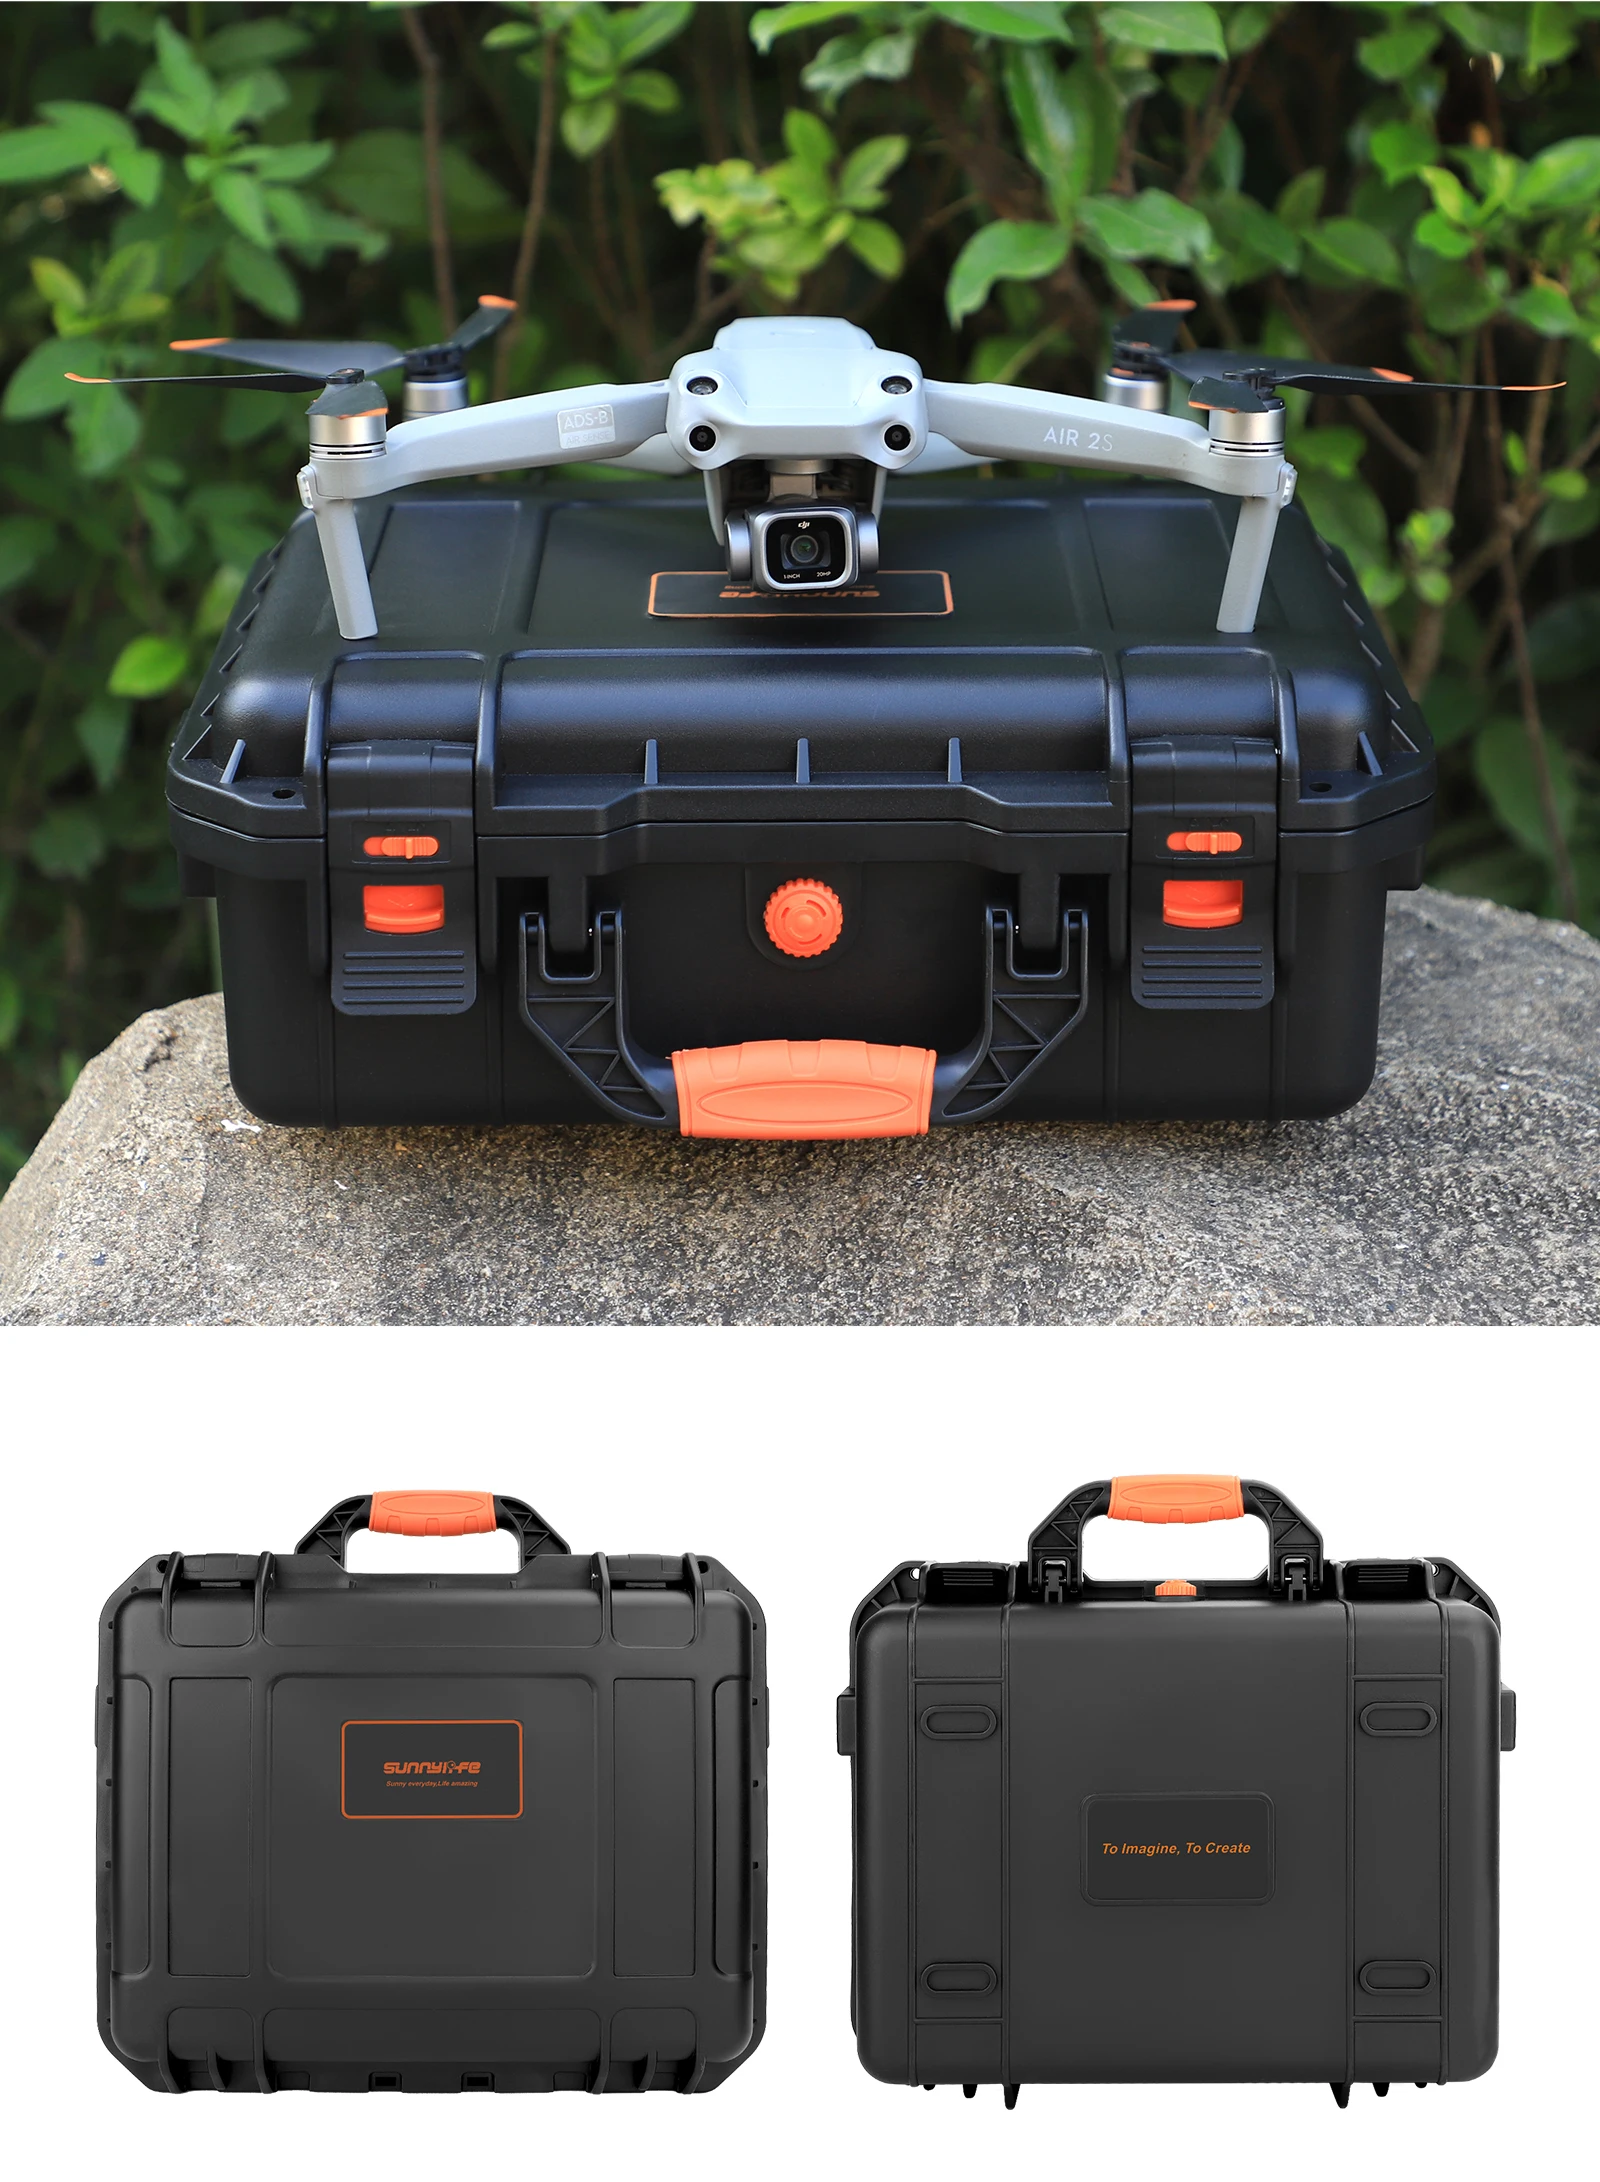 Explosion-proof Box HandBag for DJI Air 2S for Mavic Air 2 Hard shell Waterproof Box for Air 2S/2 Drone Accessories Storage Case enlarge